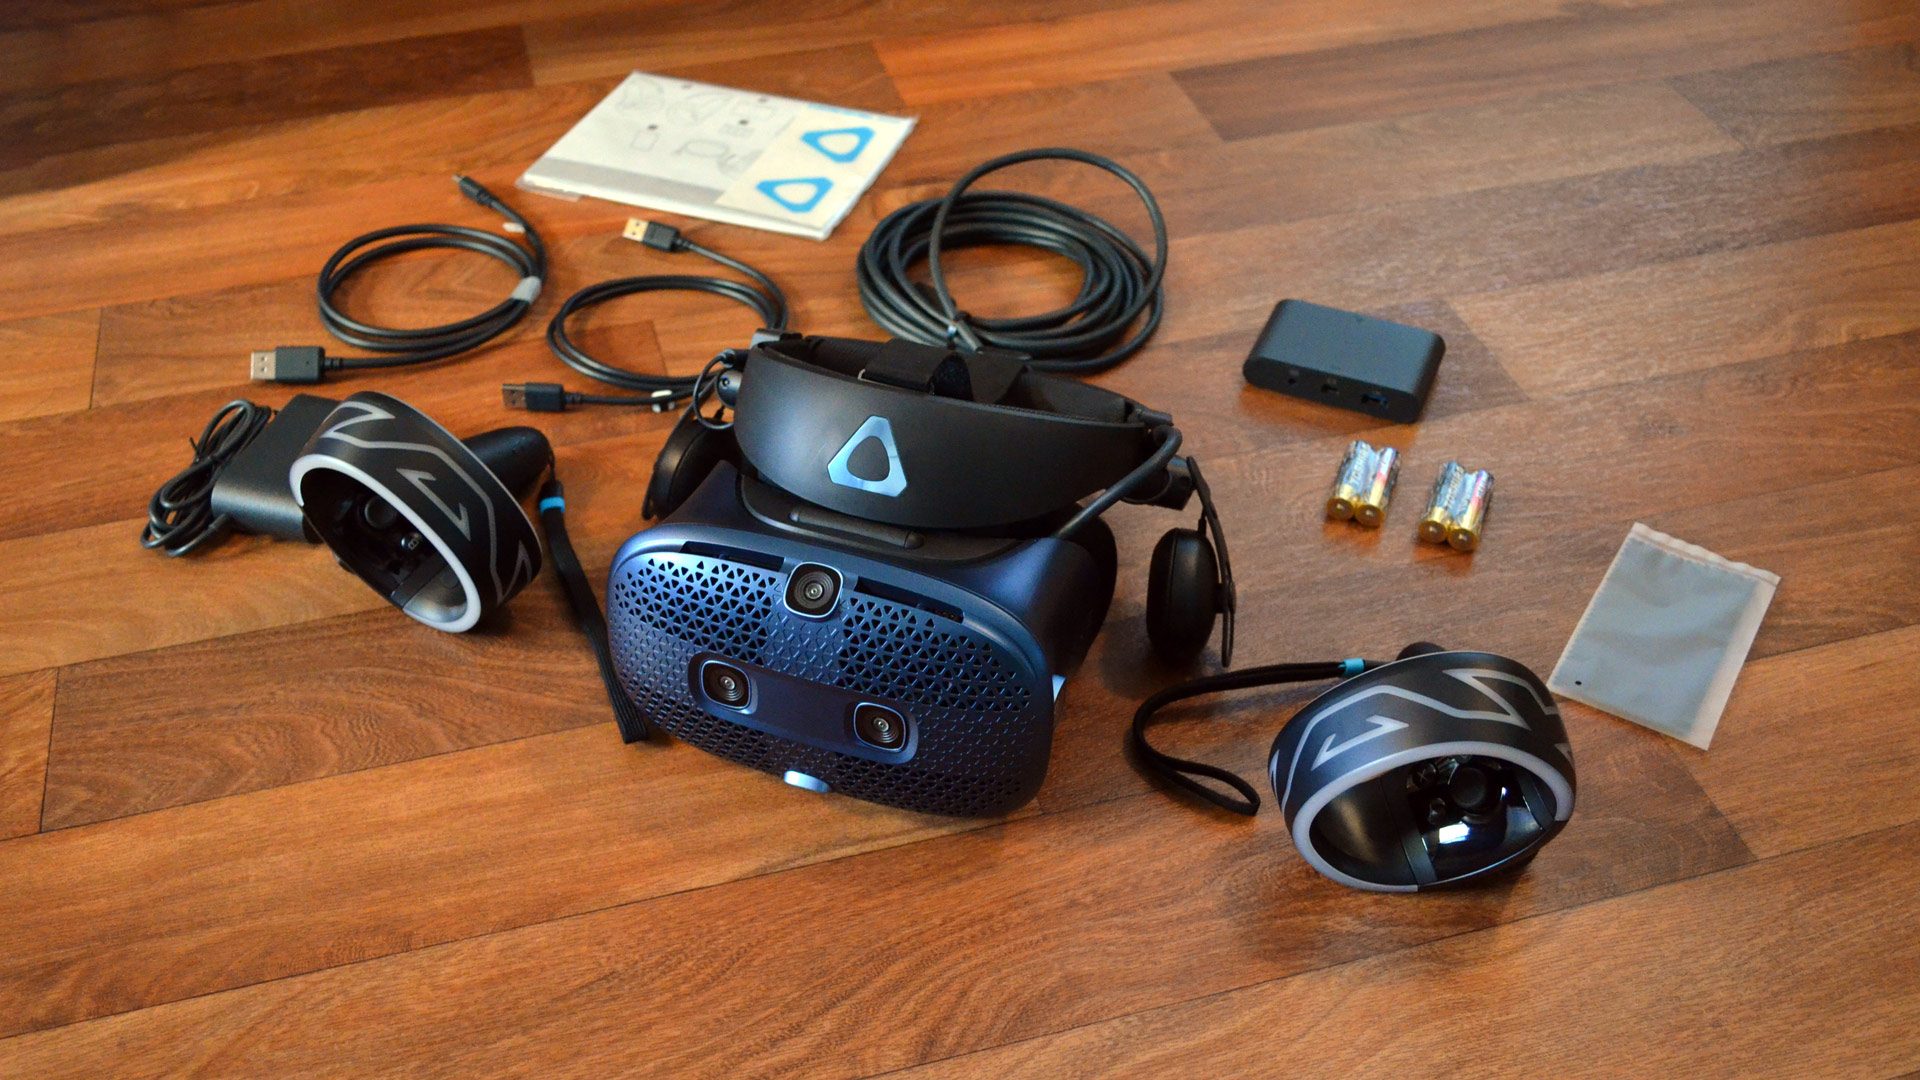 Vive Review – A Decent Headset Up Against Competition